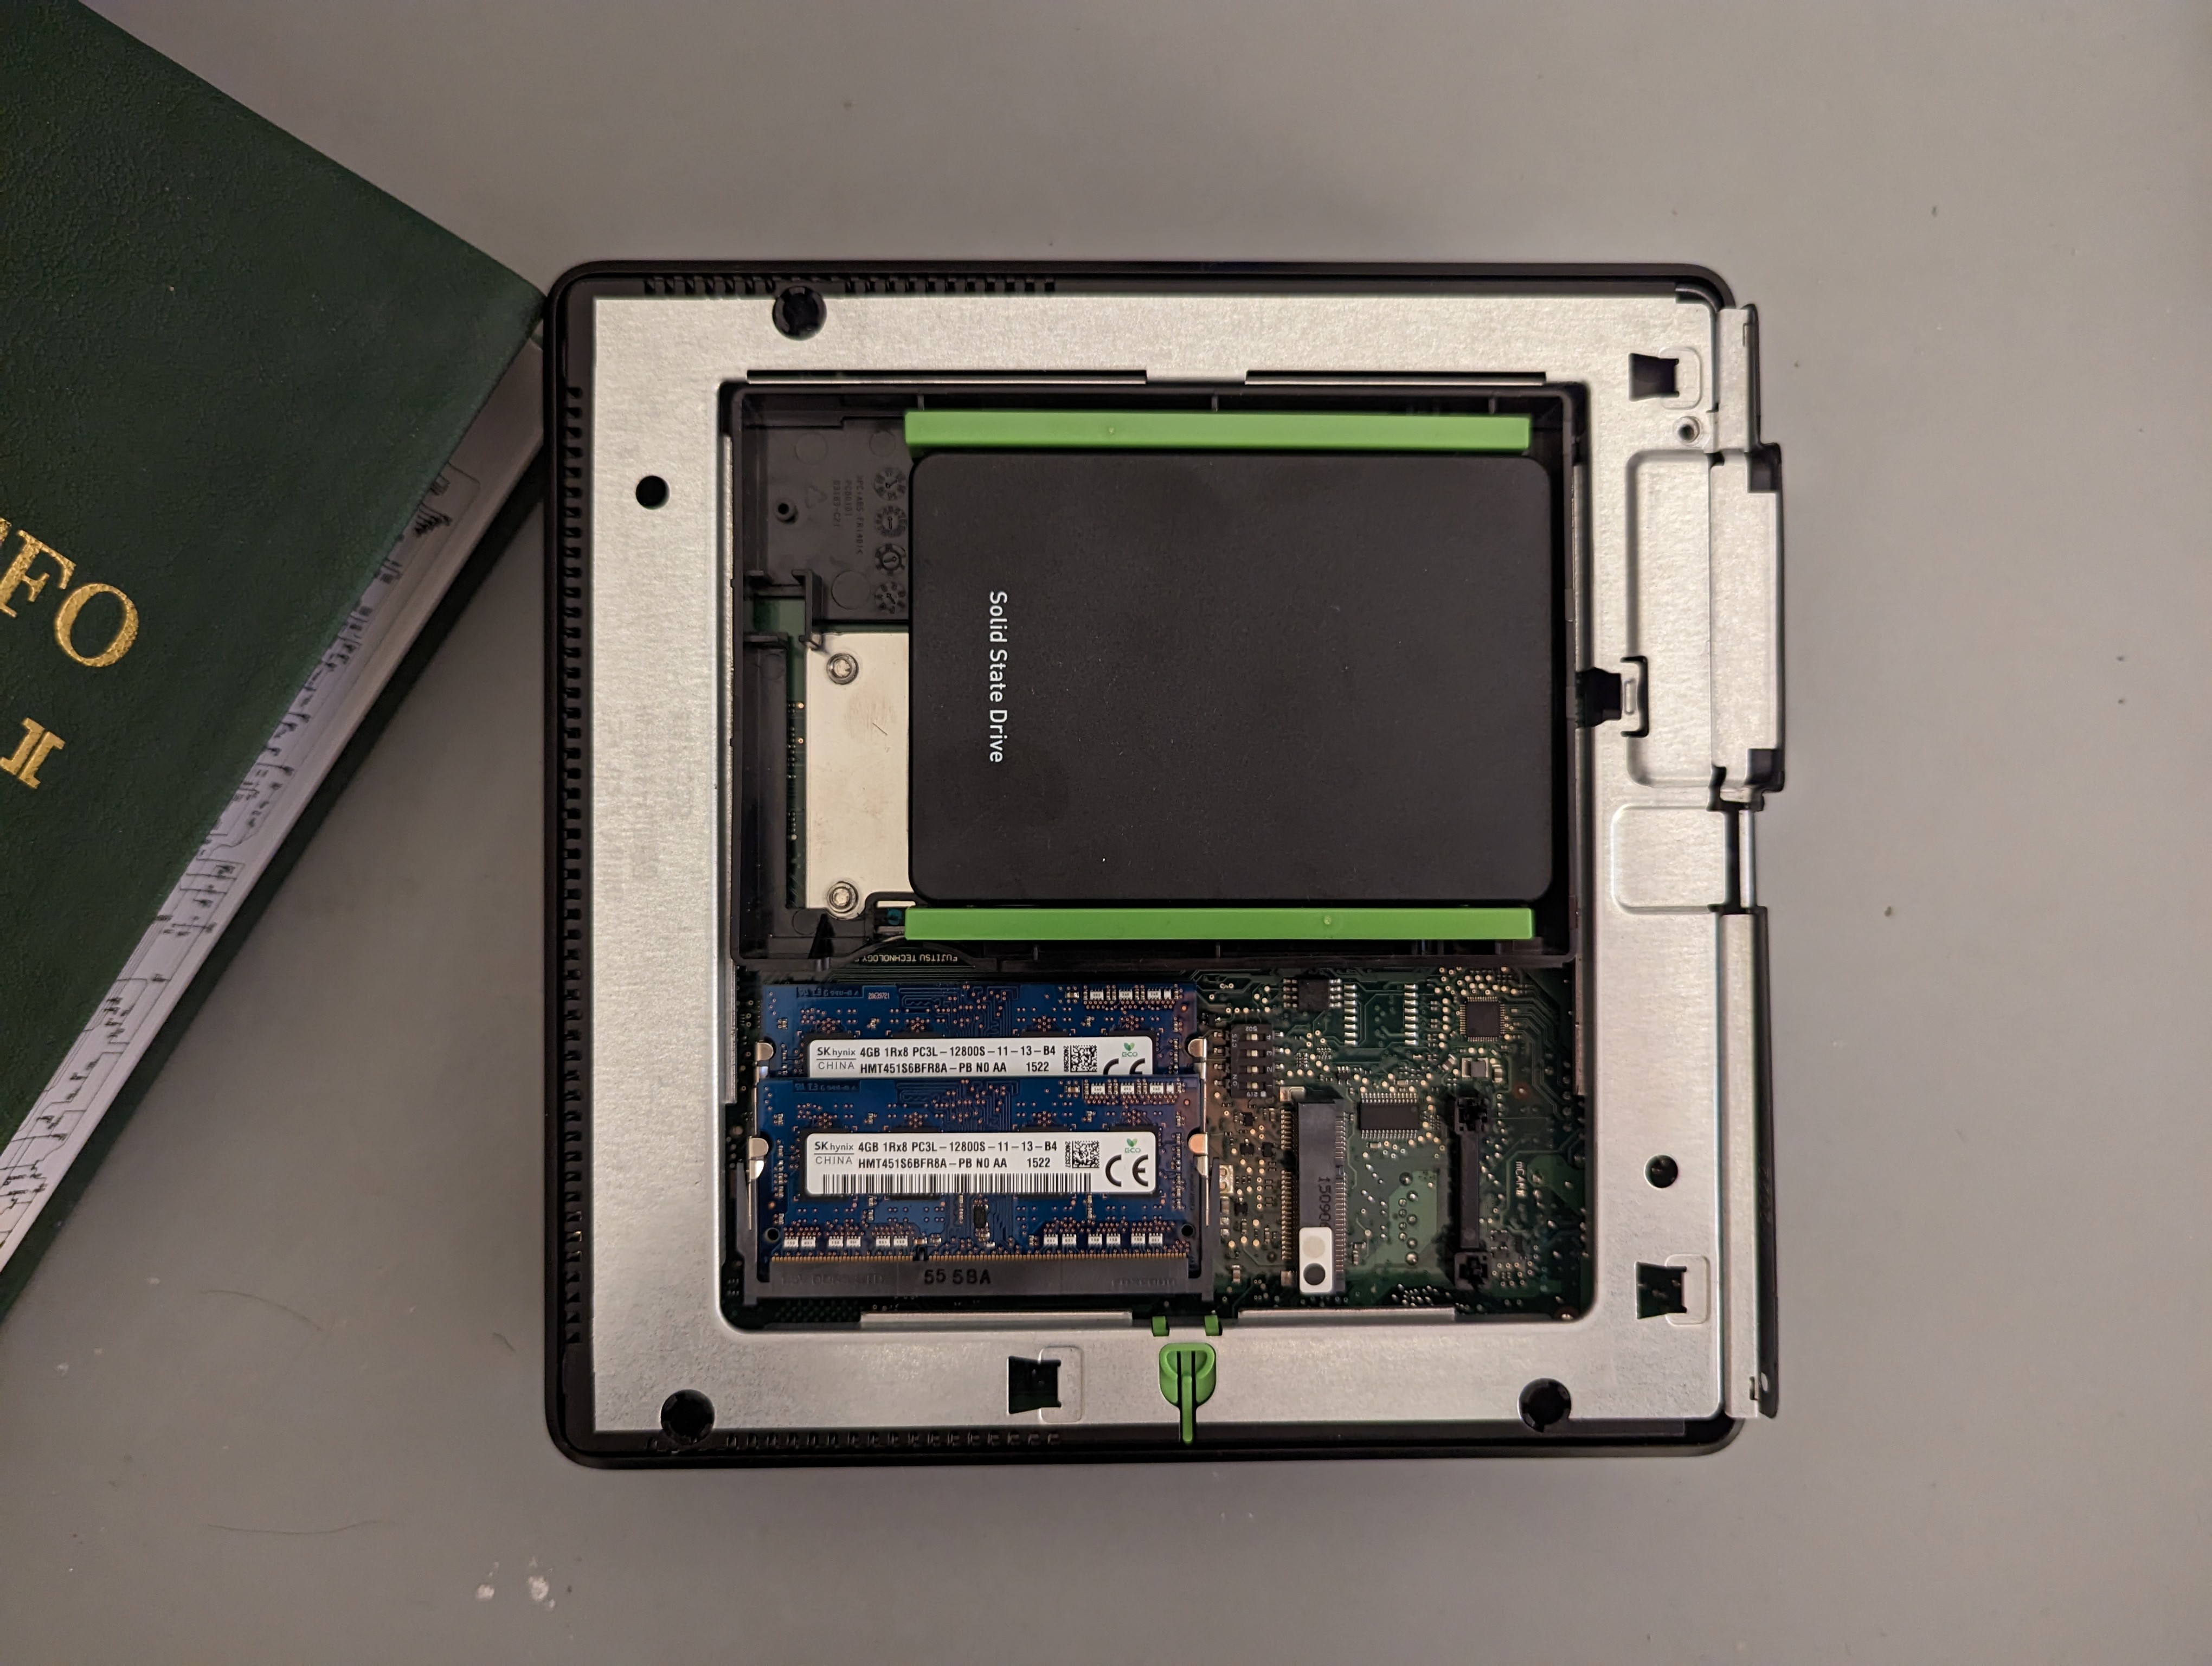 Image of a NUC with its case opened